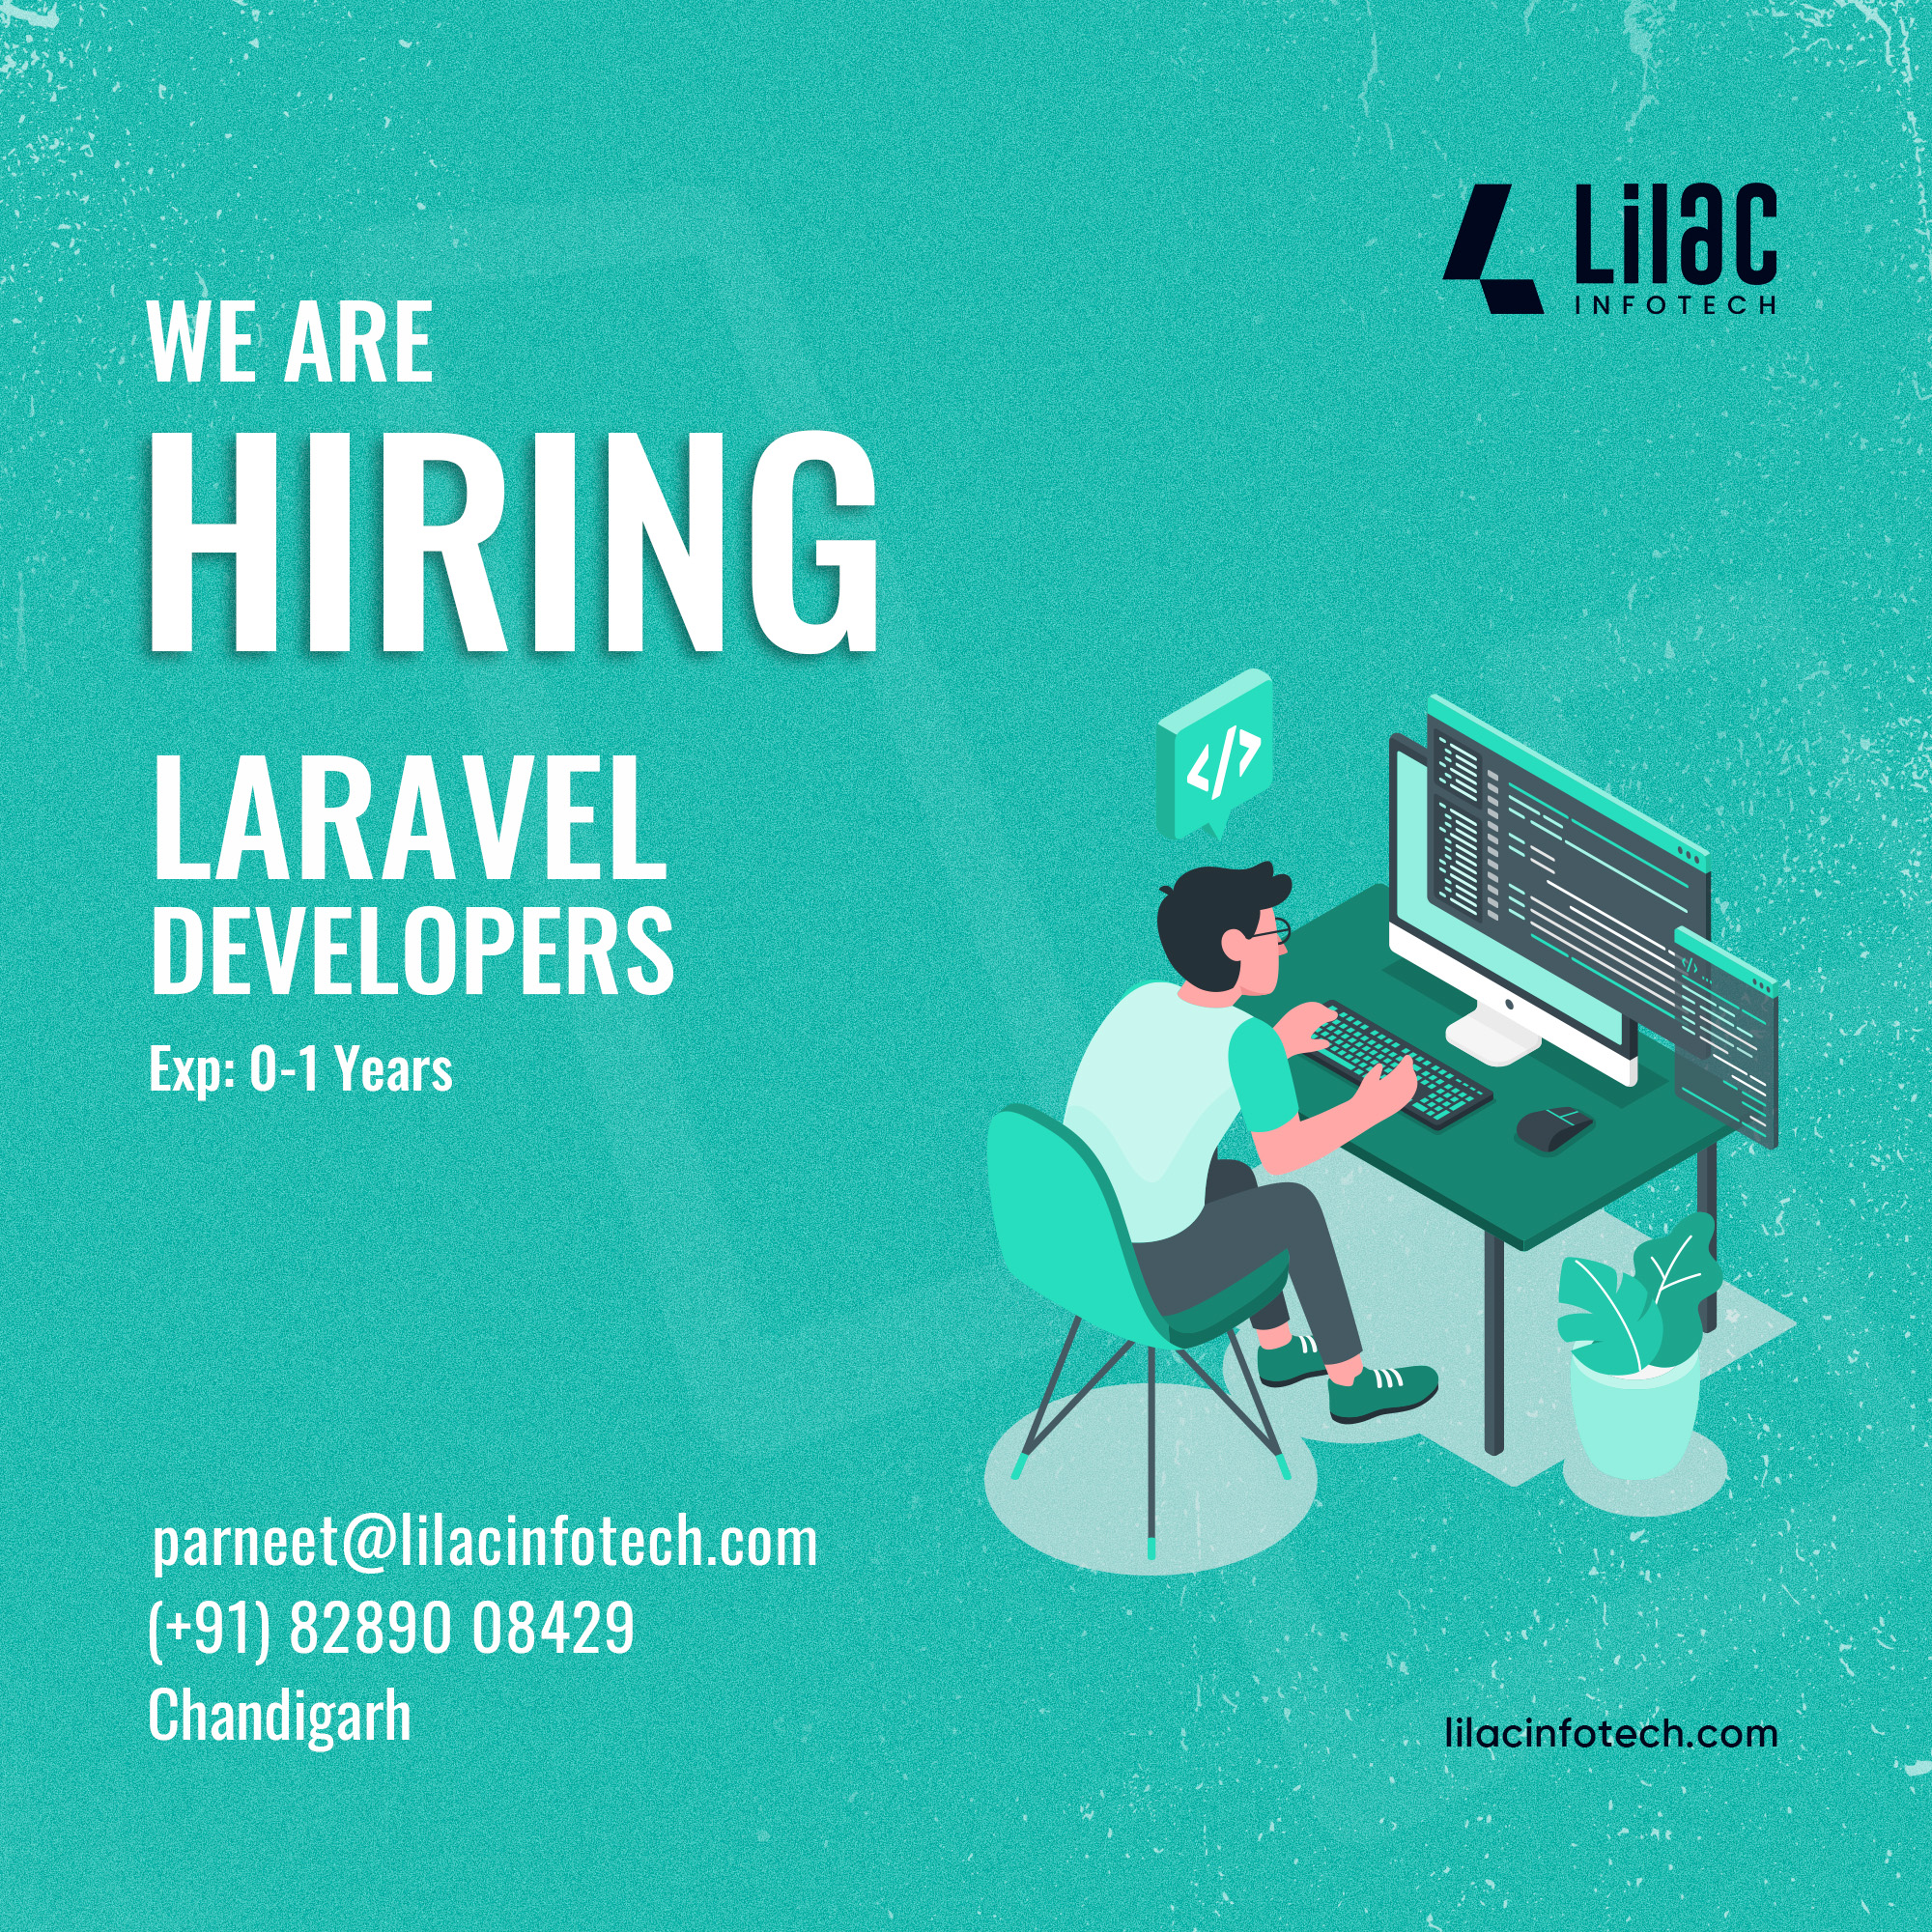  is looking for a Full Stack Developer with 1+ years of experience in PHP Laravel to build and maintain functional web pages, applications, and portals. Candidates having hands-on experience with programming technologies such as MySQL, HTML, CSS, JQuery, Javascript, Ajax, and Laravel are required. You should have extensive experience building web pages from scratch and in-depth knowledge of the following programming languages: Javascript, JQuery, PHP, MVC Frameworks (Laravel), NodeJS and other run-time environments. - diy
pti

BRIT

MEE

RUGy al ’
DEVELOPERS

Exp: 0-1 Years

   

   

as
ans
a //

parneet@lilacinfotech.com
(+91) 82890 08429
Chandigarh